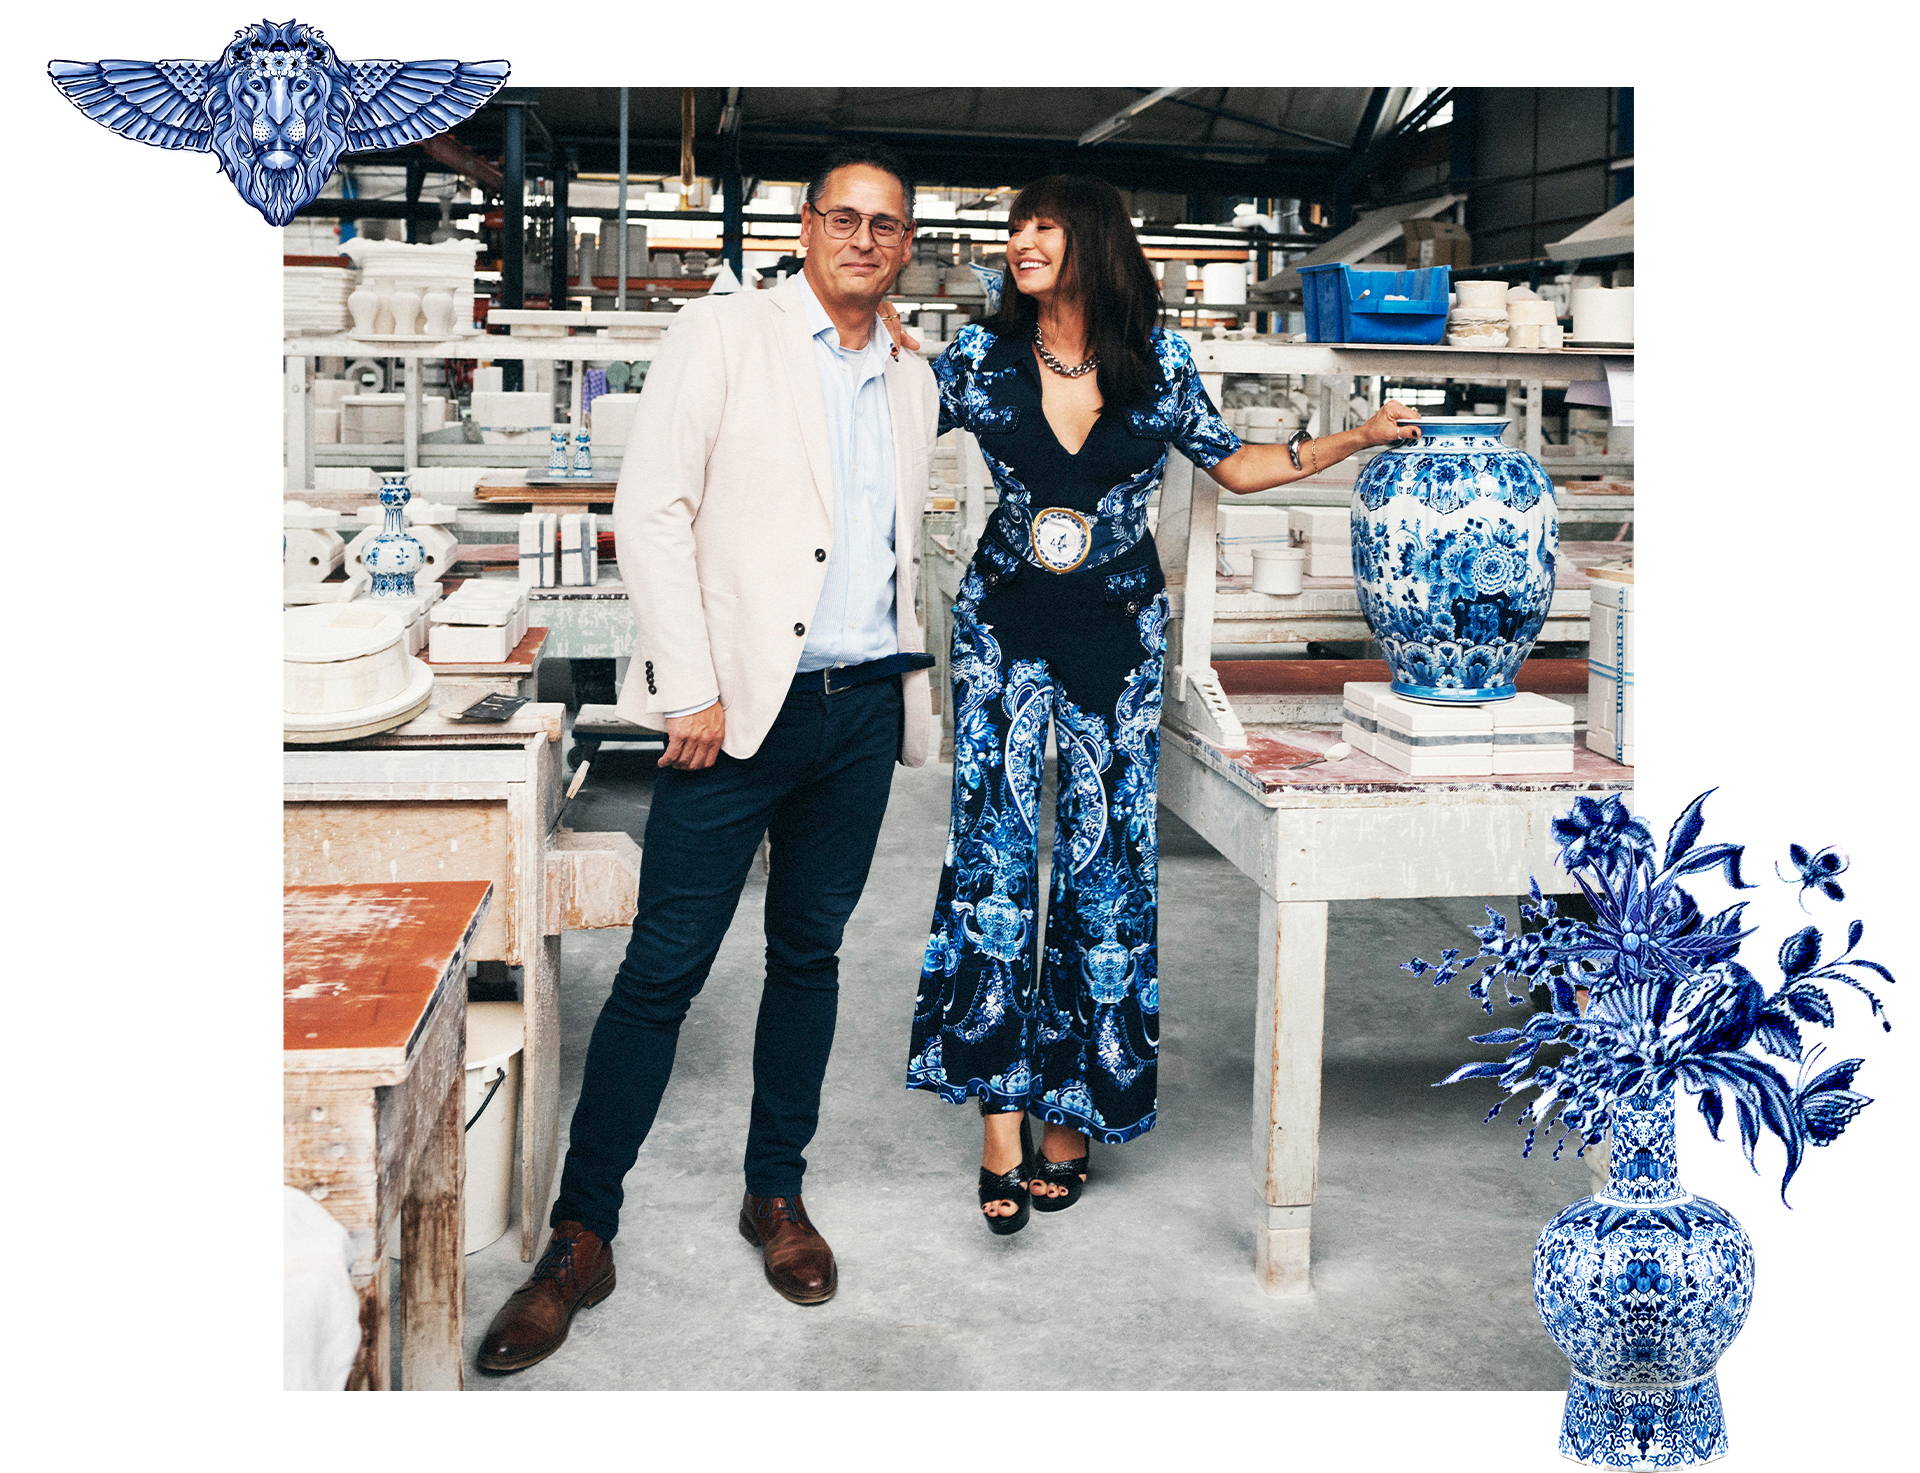 PHOTO OF CAMILLA FRANKS AND ROYAL DELFT DESIGN MANAGER JOFFERY WALONKERN